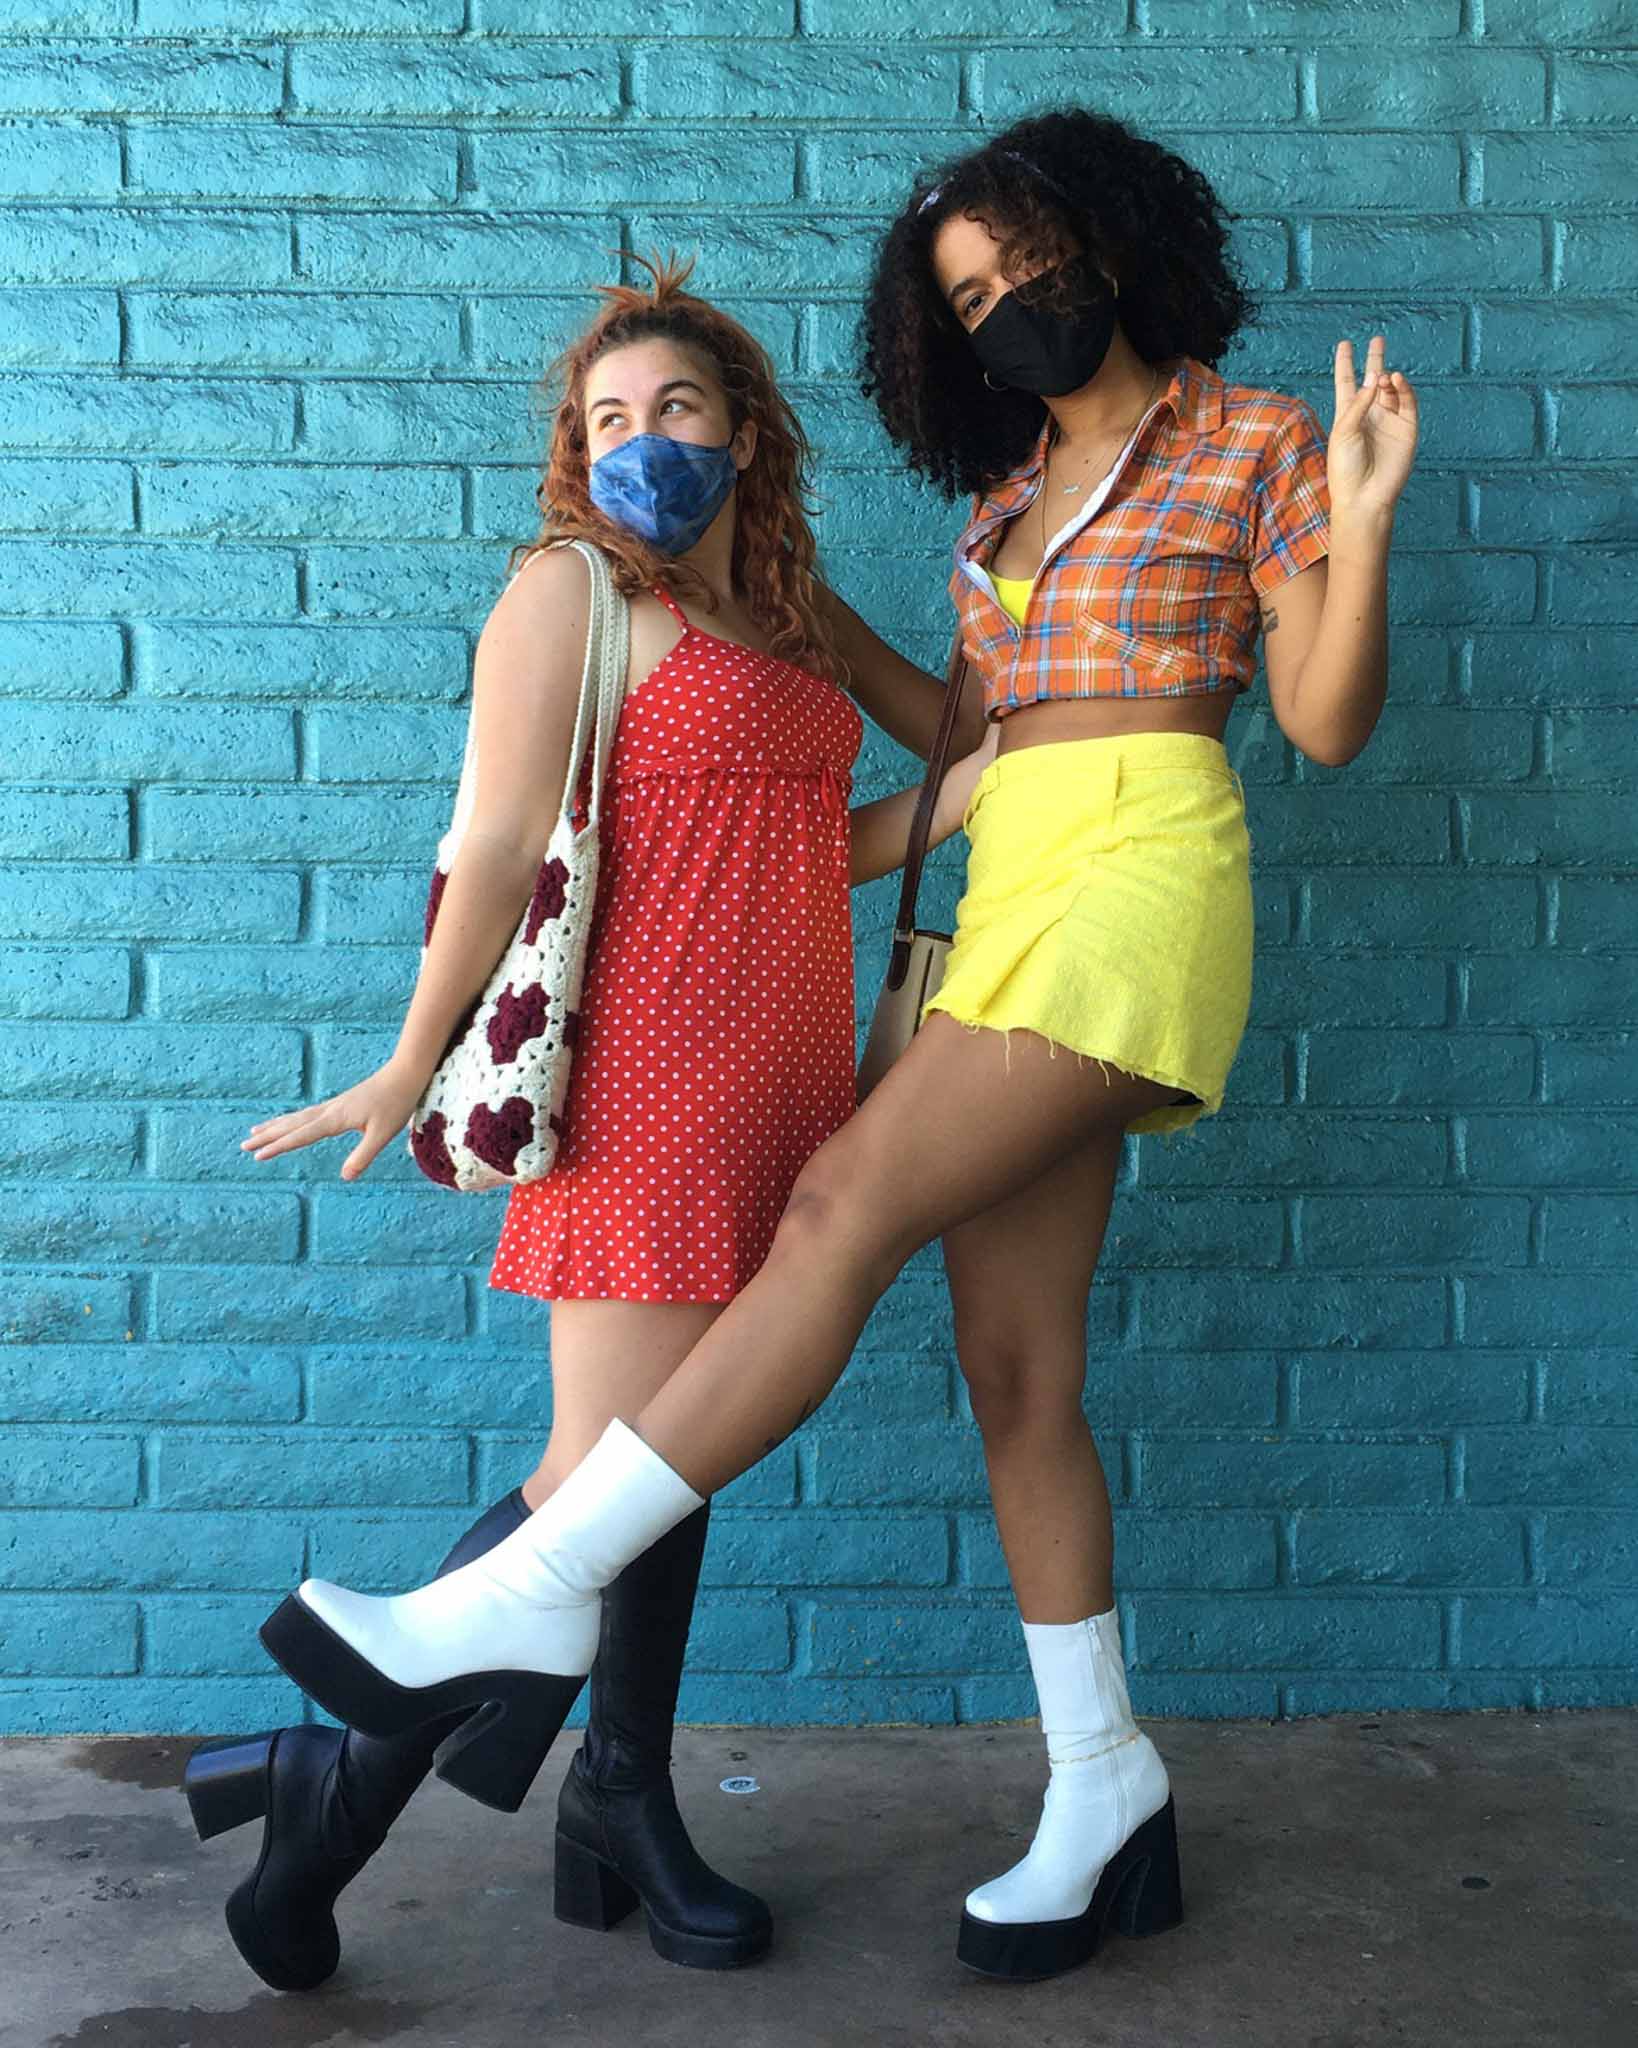 Person wearing platform black boots with red polka dot dress (left) and person wearing platform white and black boots with yellow skirt and plaid crop top (right)